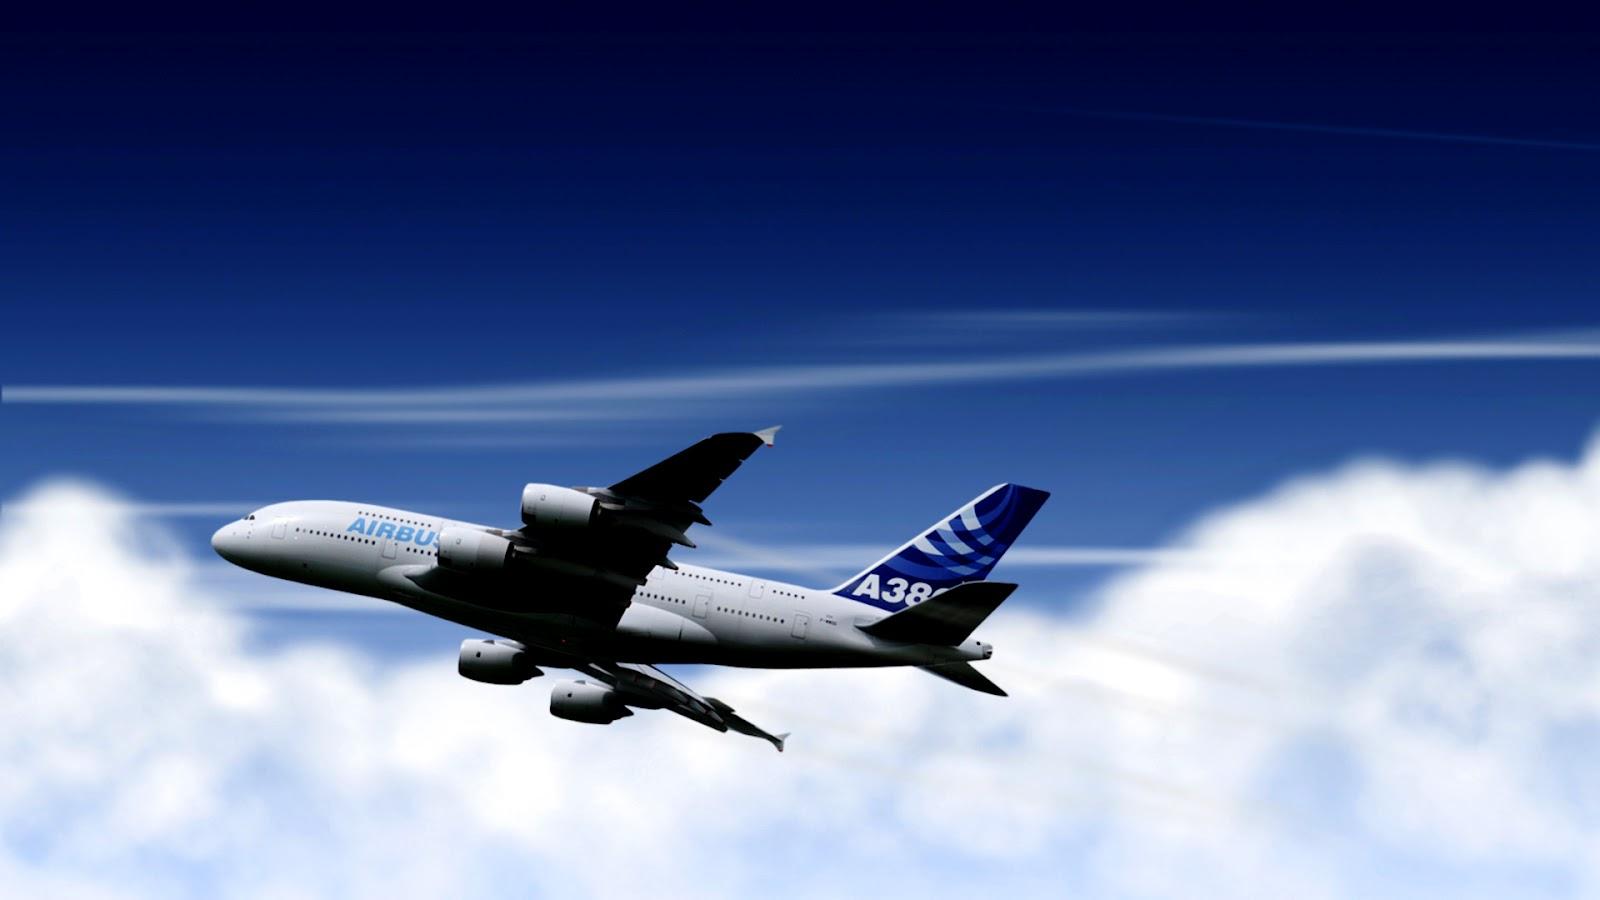 Airbus A380 Wallpaper HD , Download 4K Wallpaper For Free